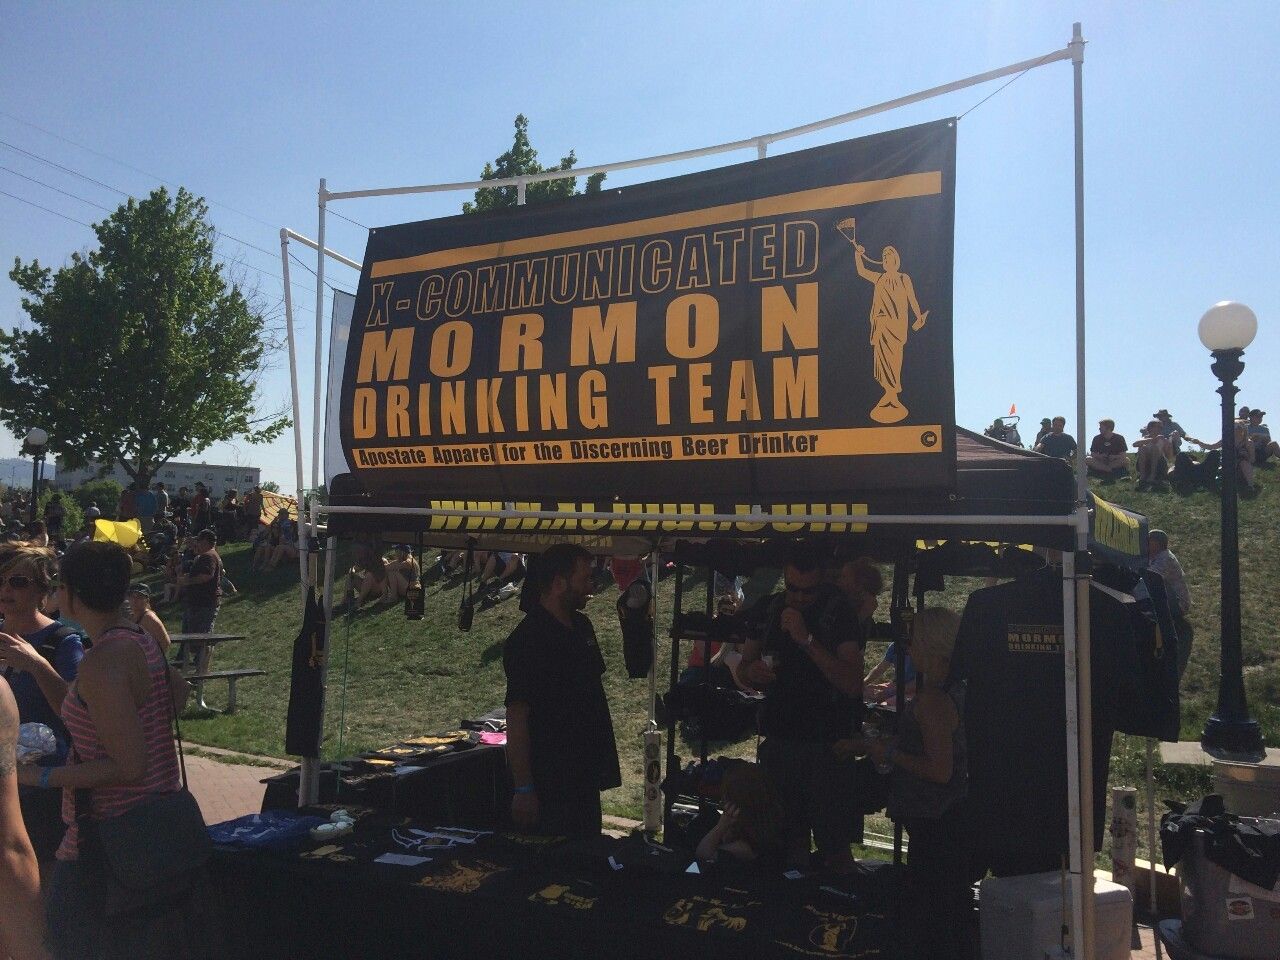 The excommunicated Mormon Drinking team.